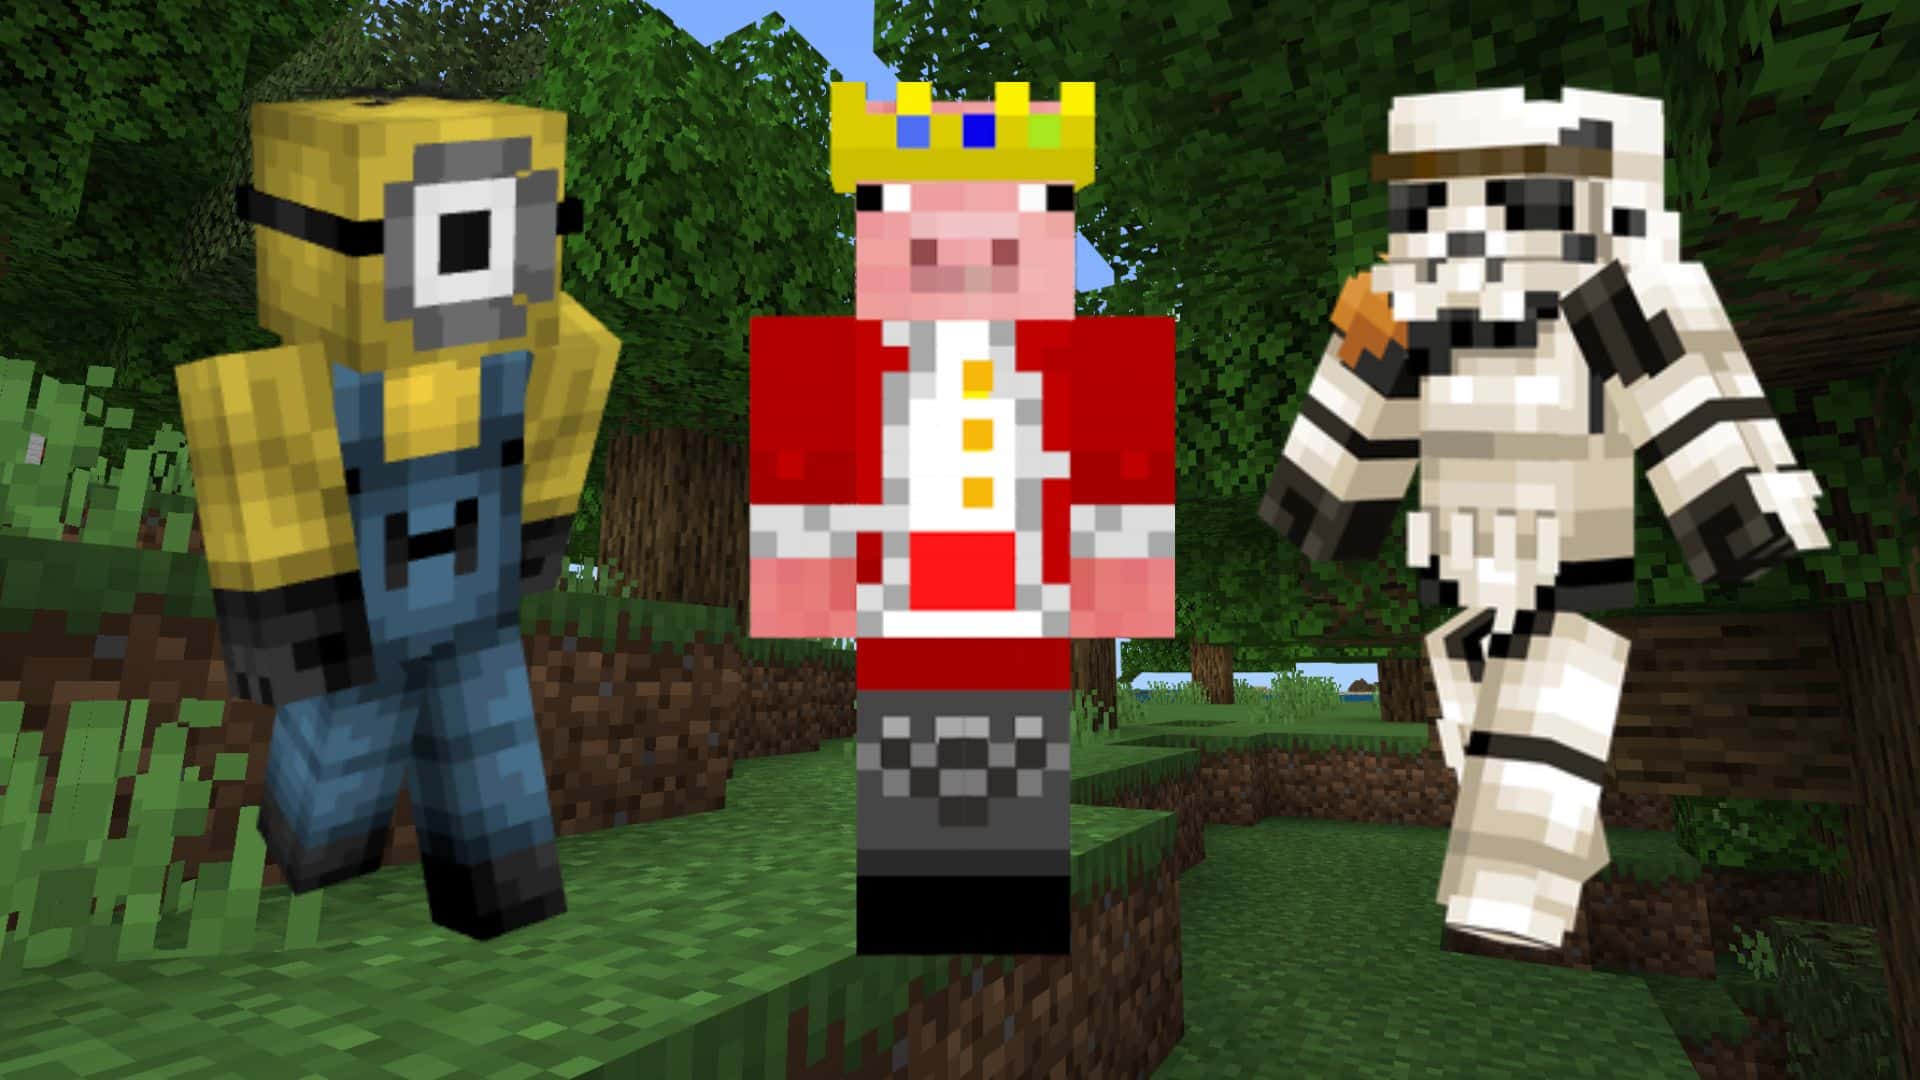 The classic Minecraft Skins